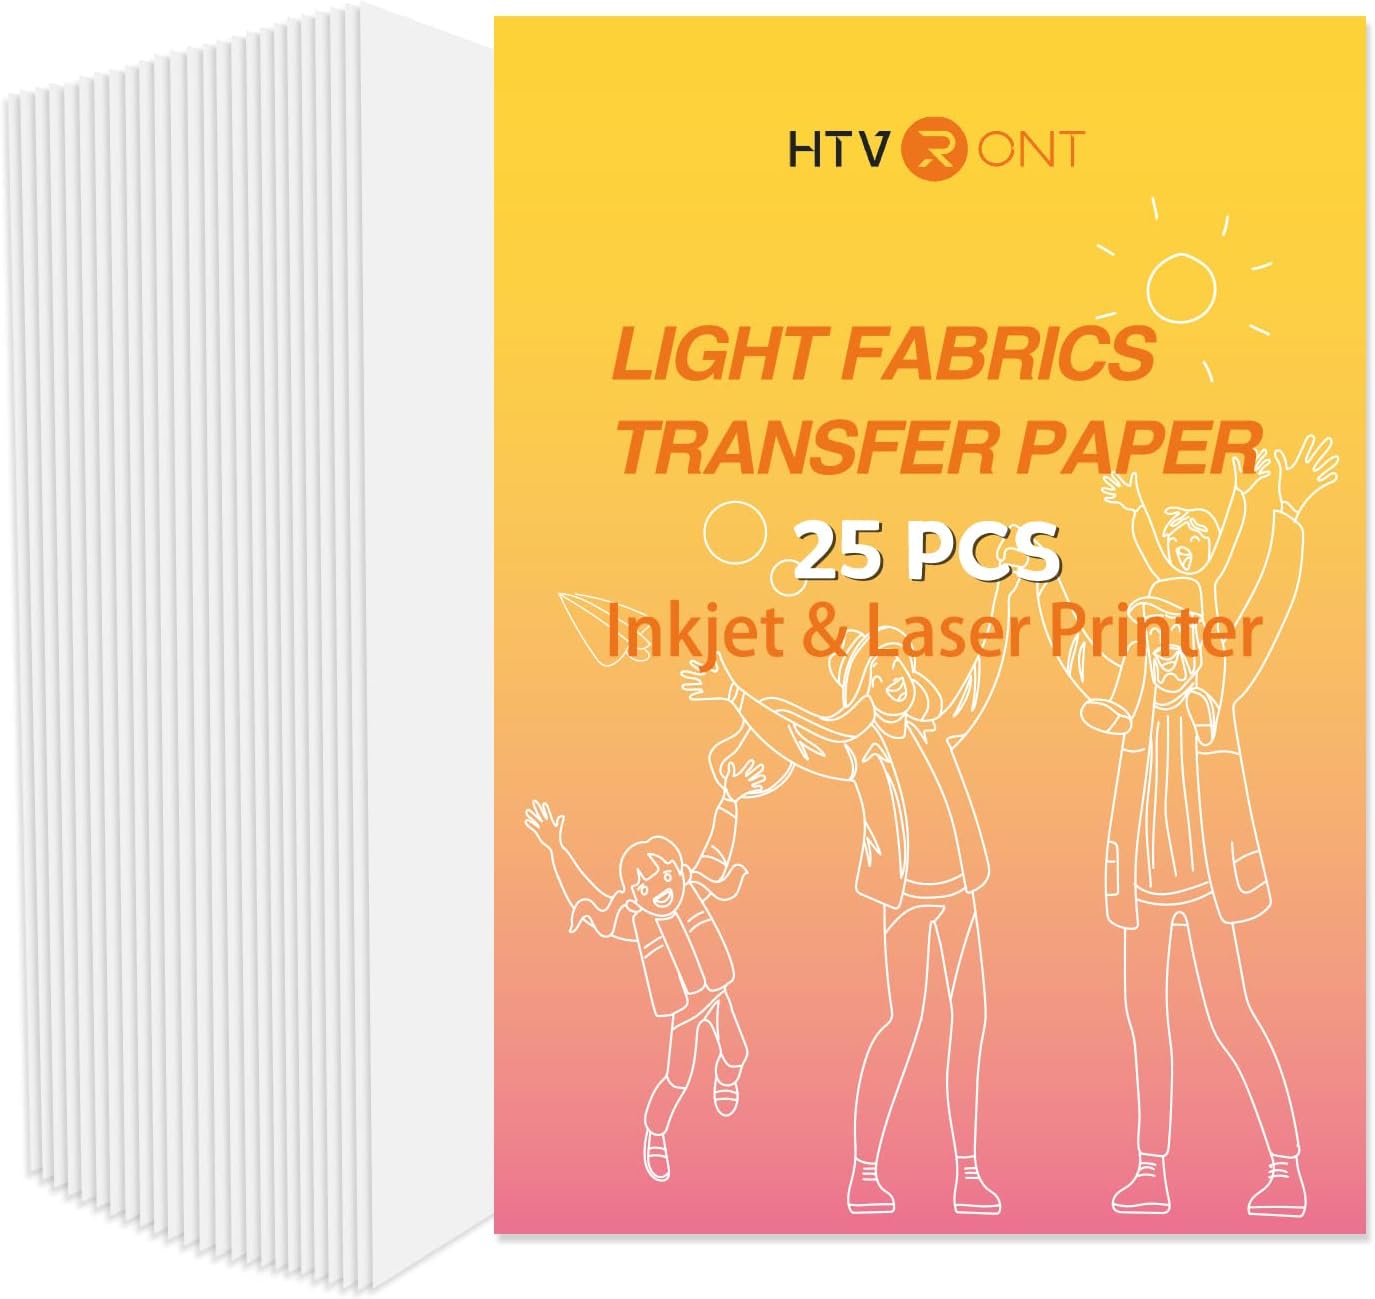 PPD Inkjet Iron-On Dark T Shirt Transfers Paper LTR 8.5x11 Pack of 50 Sheets (PPD004-50)